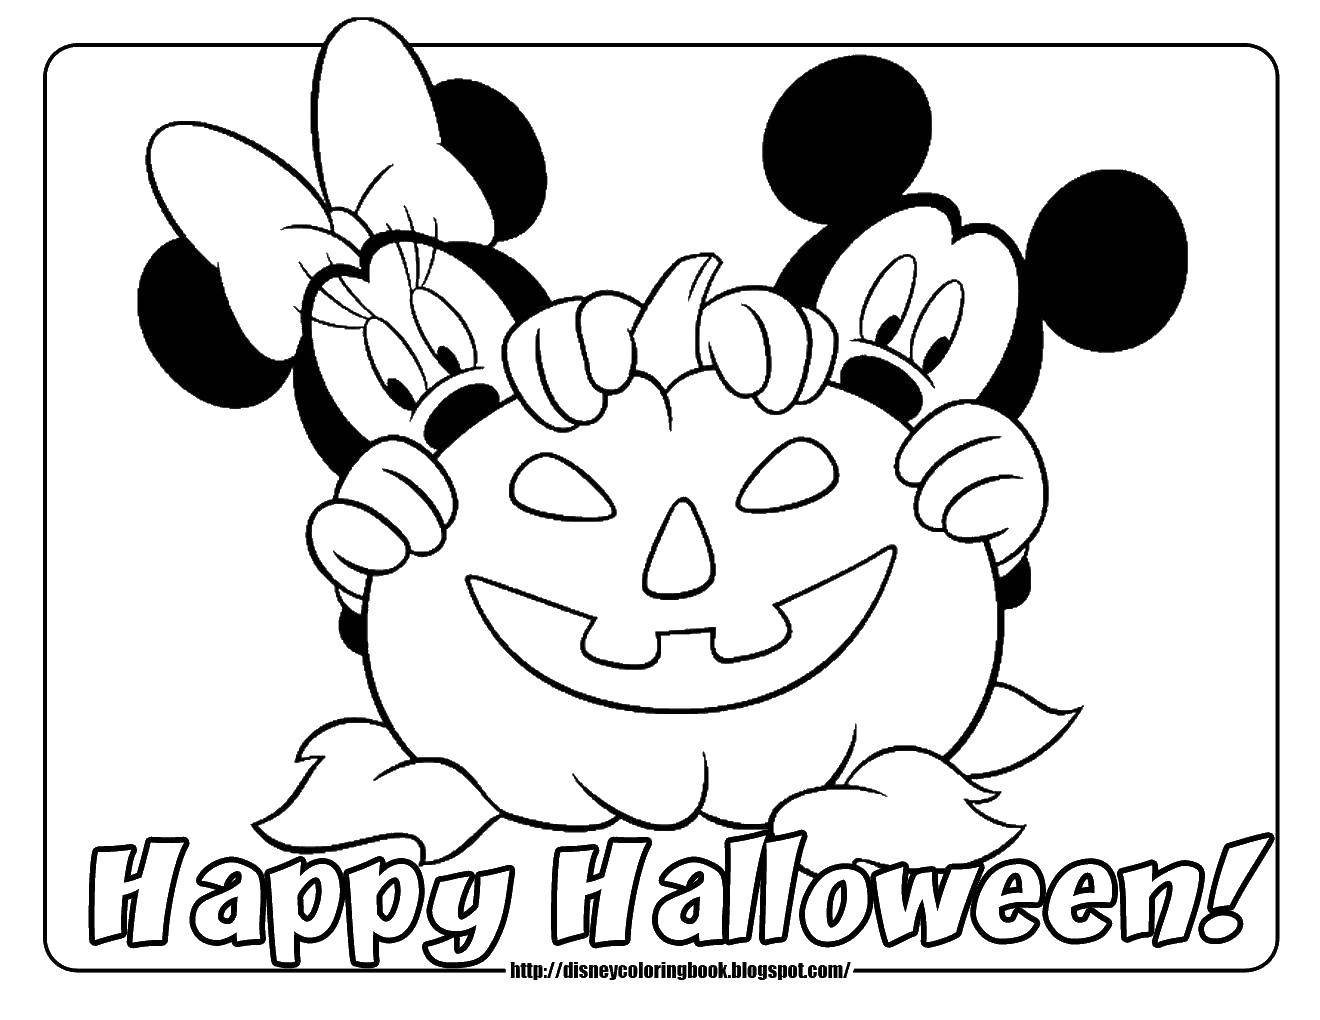 Coloring Happy Halloween. Category cartoons. Tags:  Disney, Mickey Mouse, Minnie Mouse.